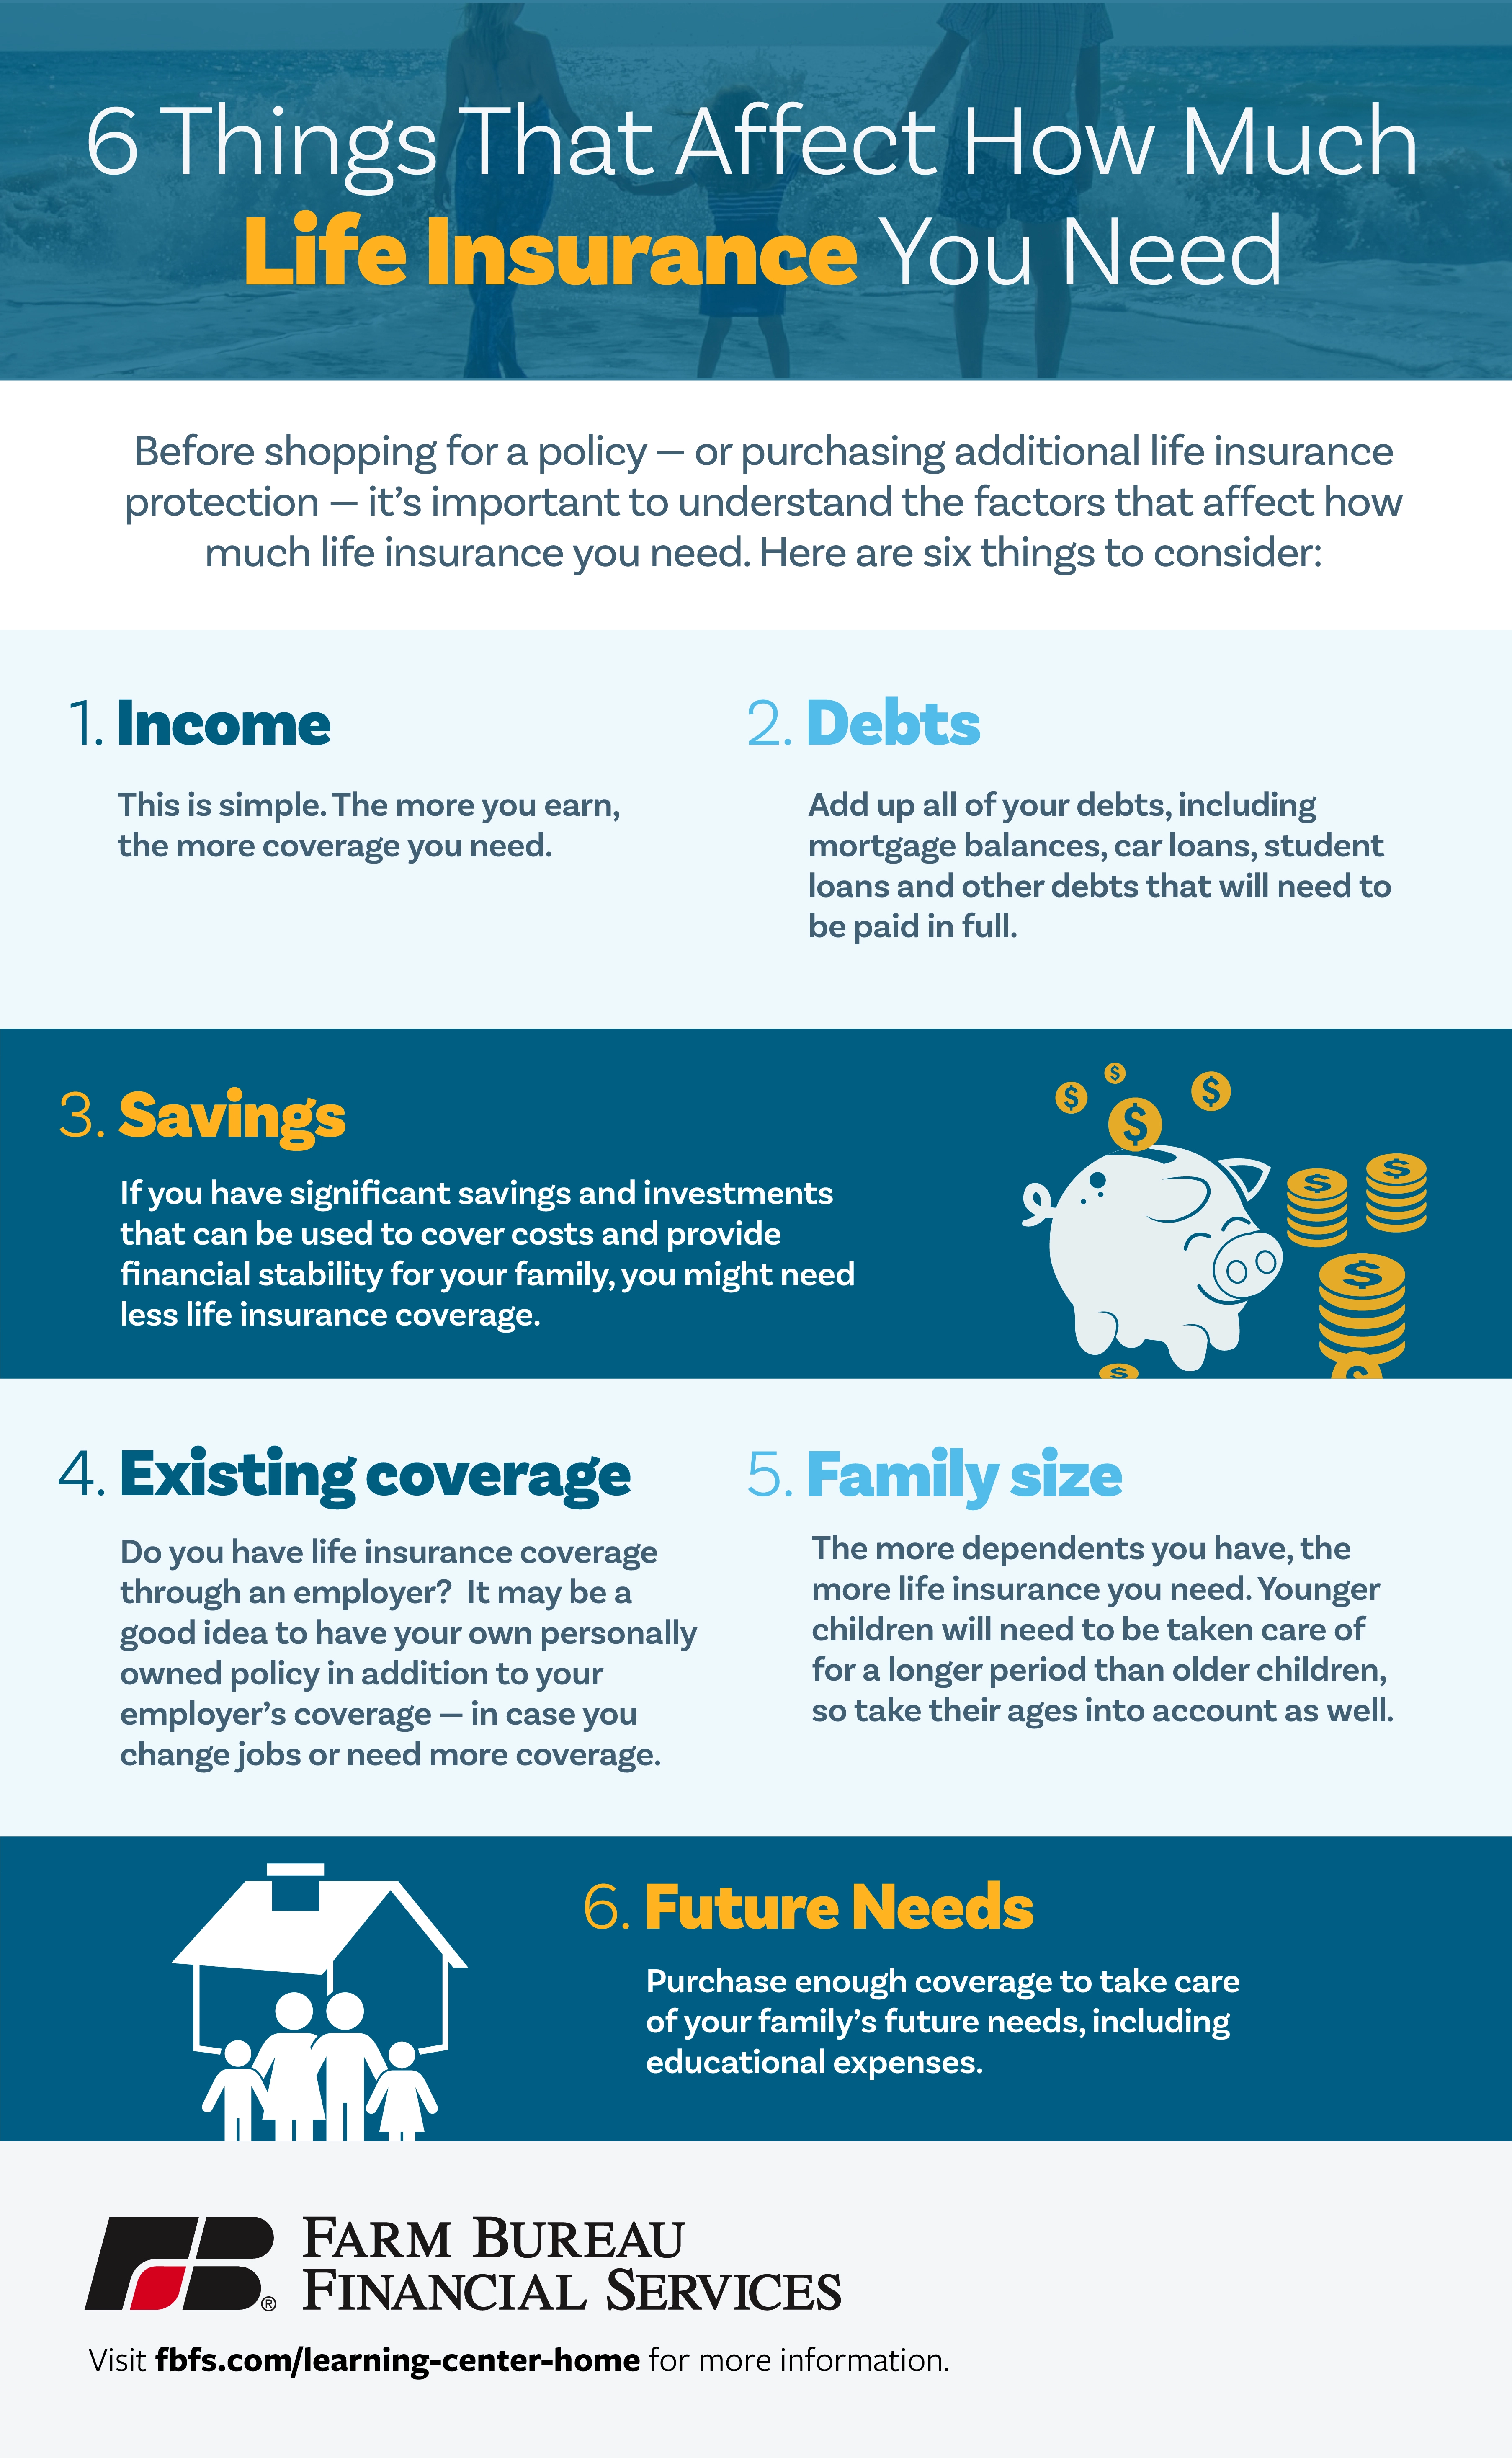 What Factors Should I Consider When Buying Life Insurance?